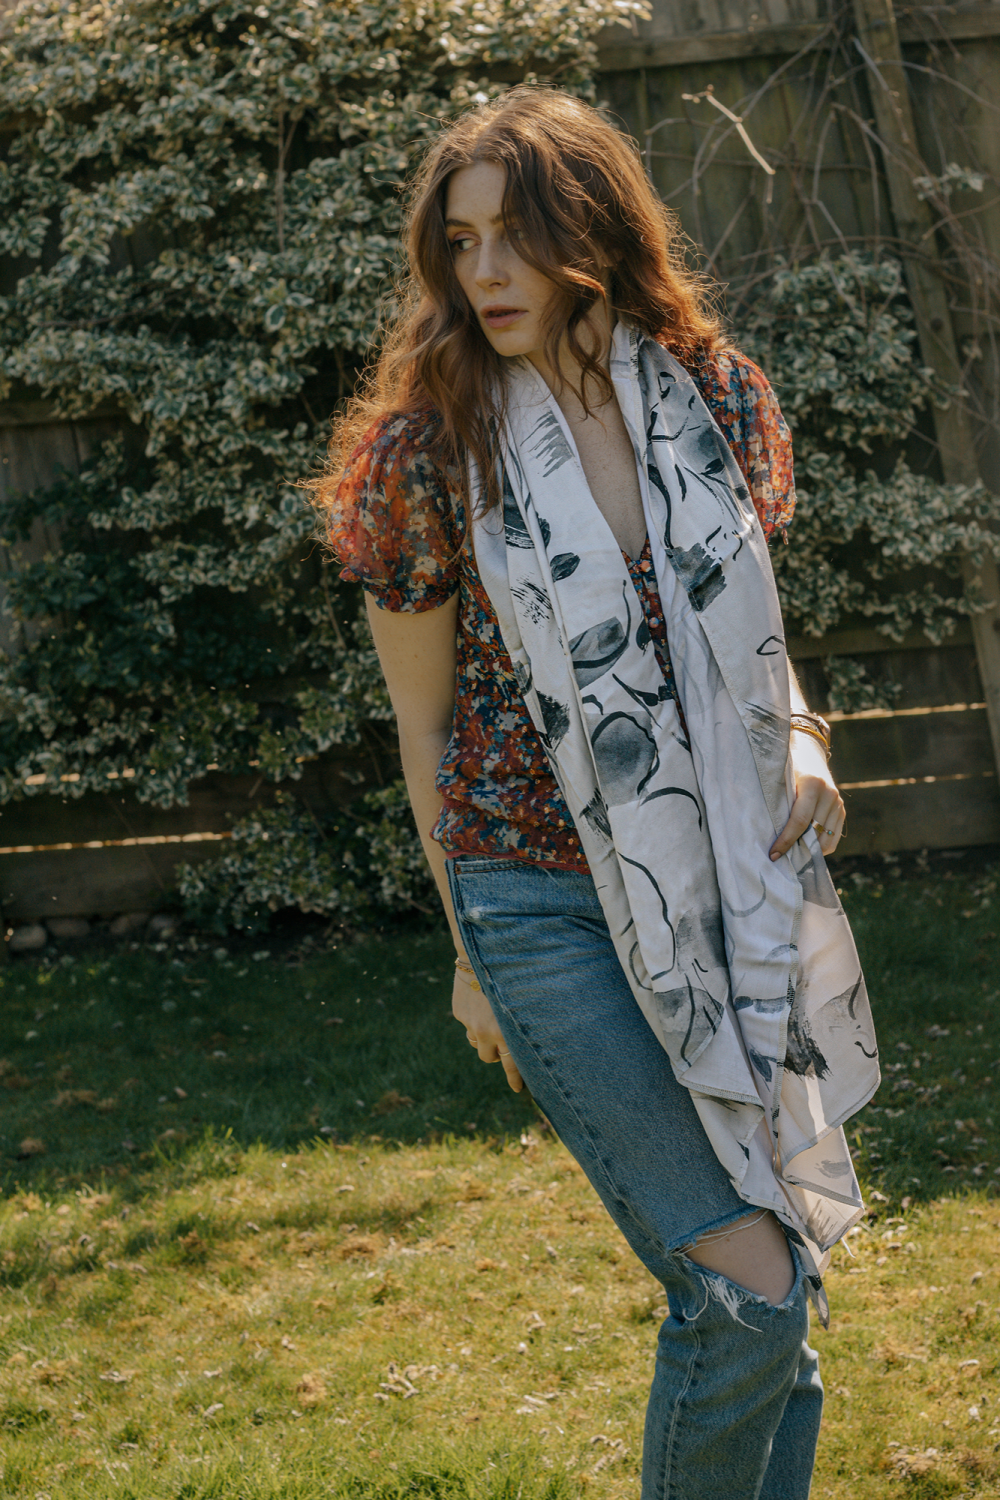 A person wearing a long white scarf with an abstract flower pattern